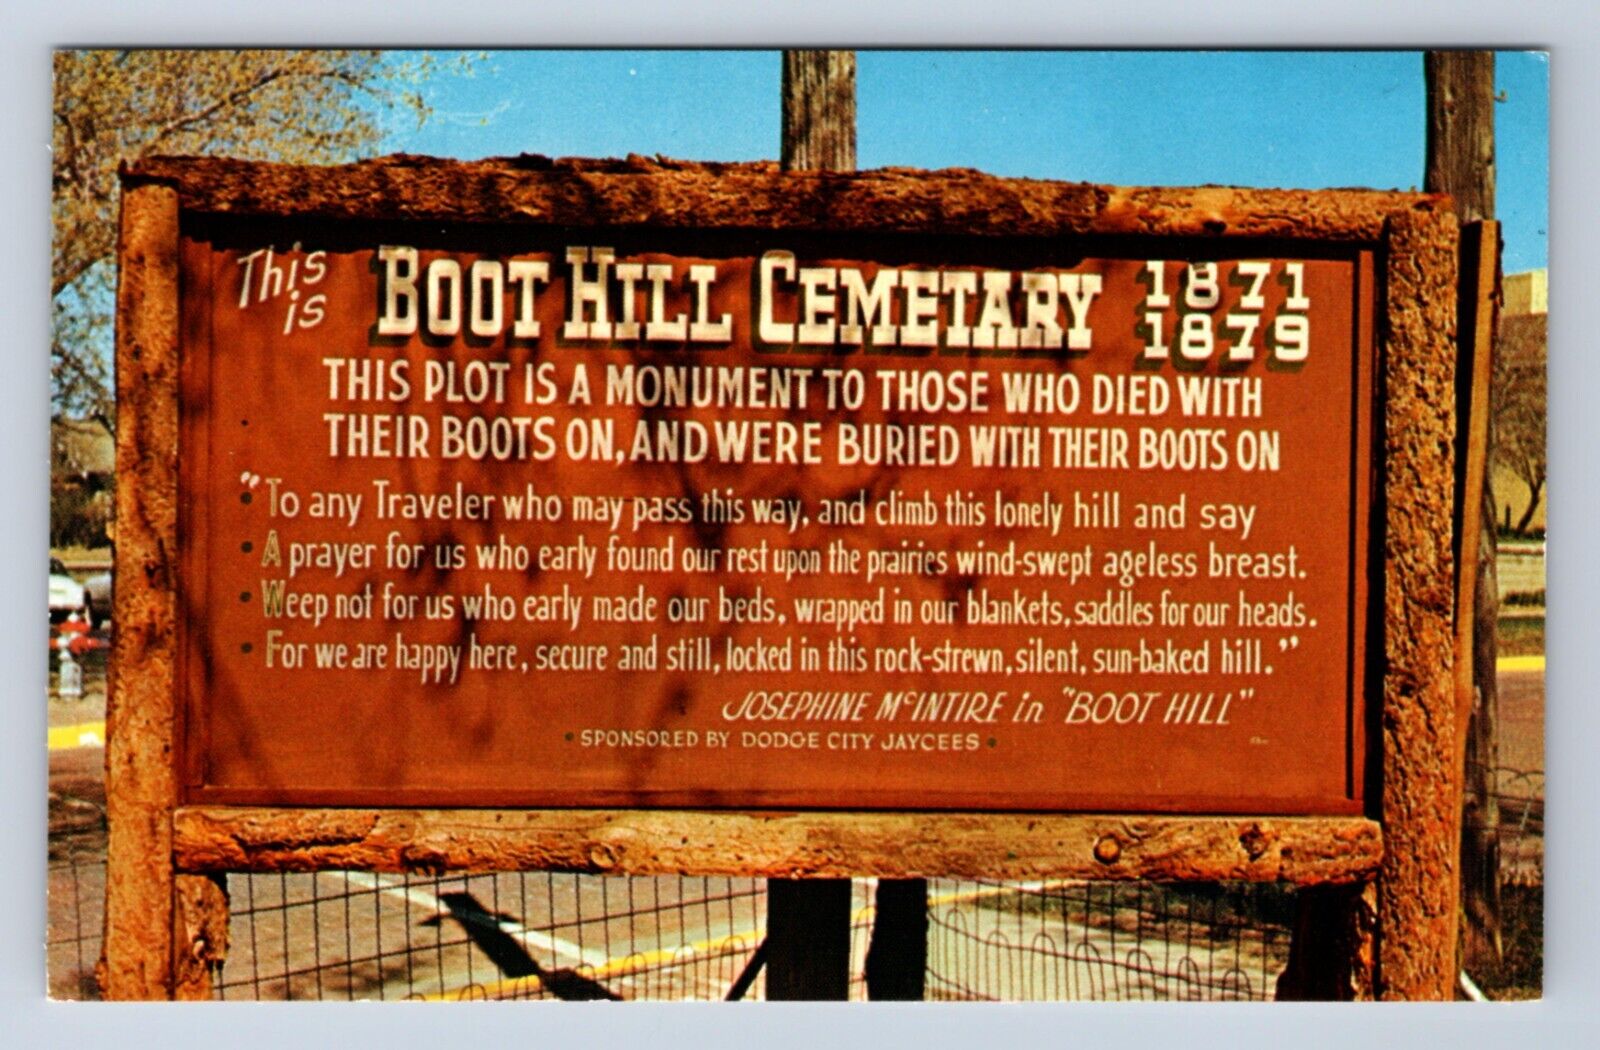 VINTAGE THIS IS BOOT HILL CEMETARY 1871-1879 DODGE CITY, KANSAS POSTCARD AT